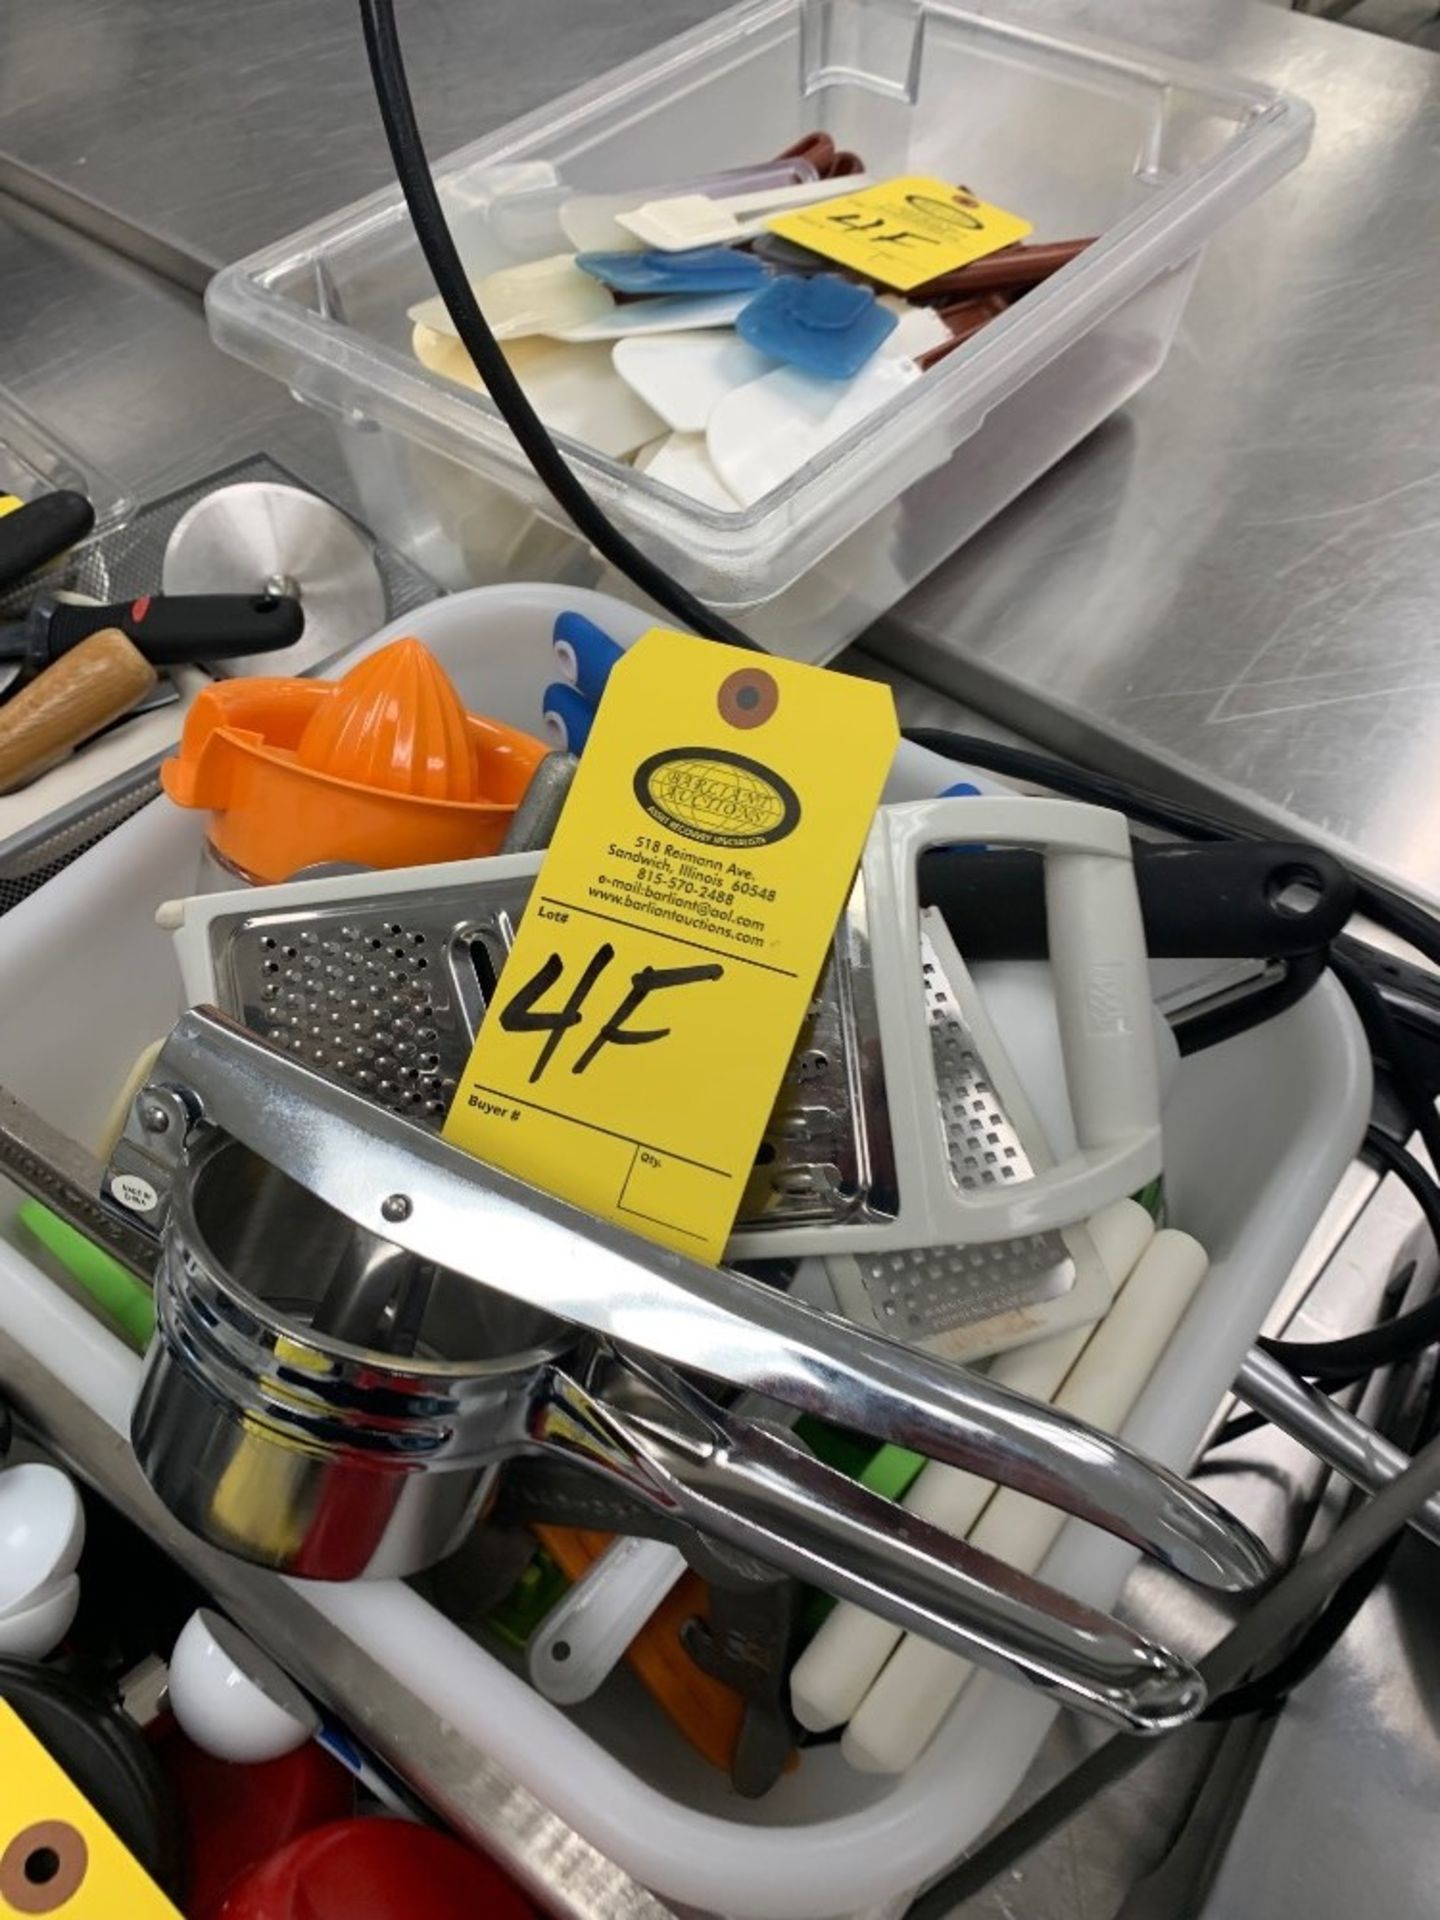 Lot Kitchen Utensils - Removal Is By Appointment Only-All Small Hand Carry Items-Removal Will Be